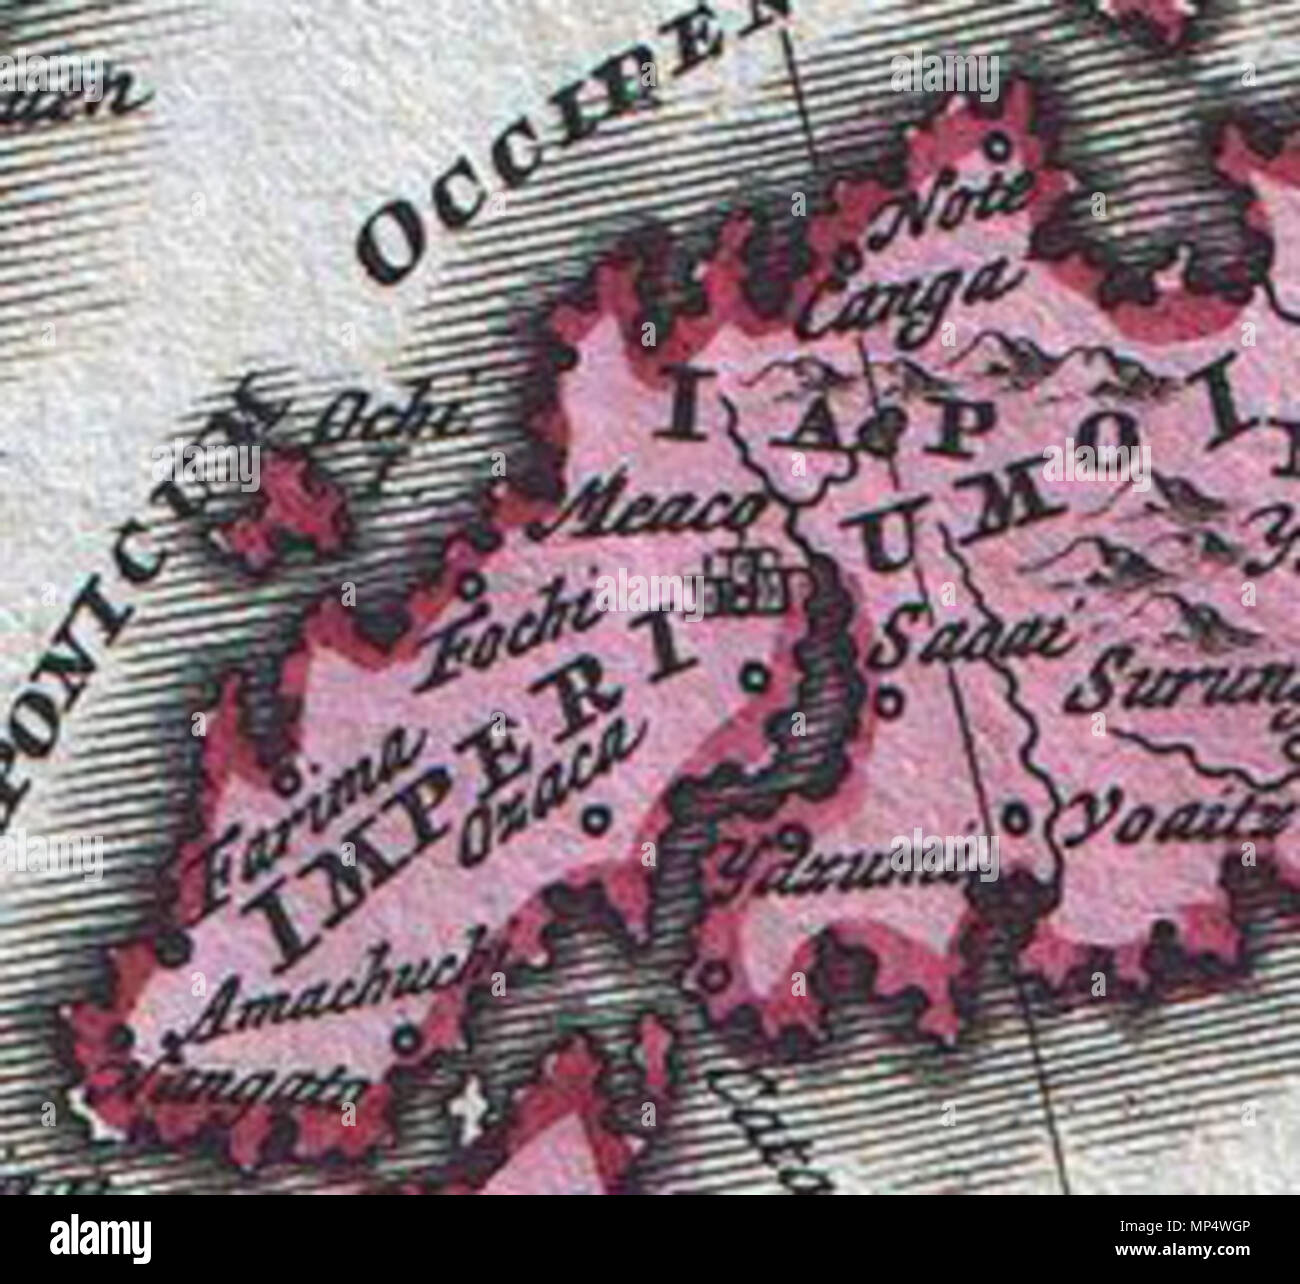 . English: A part of 18th century map showing the city of Kyoto as Meaco . circa 1730 (undated).   Johann Christoph Homann  (1703–1730)    Description German physician, publisher and cartographer  Date of birth/death 1703 1730  Location of birth/death Nuremberg Nuremberg  Work location Nuremberg  Authority control  : Q18508380 VIAF: 74749664 ISNI: 0000 0000 6684 3343 LCCN: n2006091311 GND: 12304071X SUDOC: 119964775 WorldCat 879 Meaco in map Stock Photo